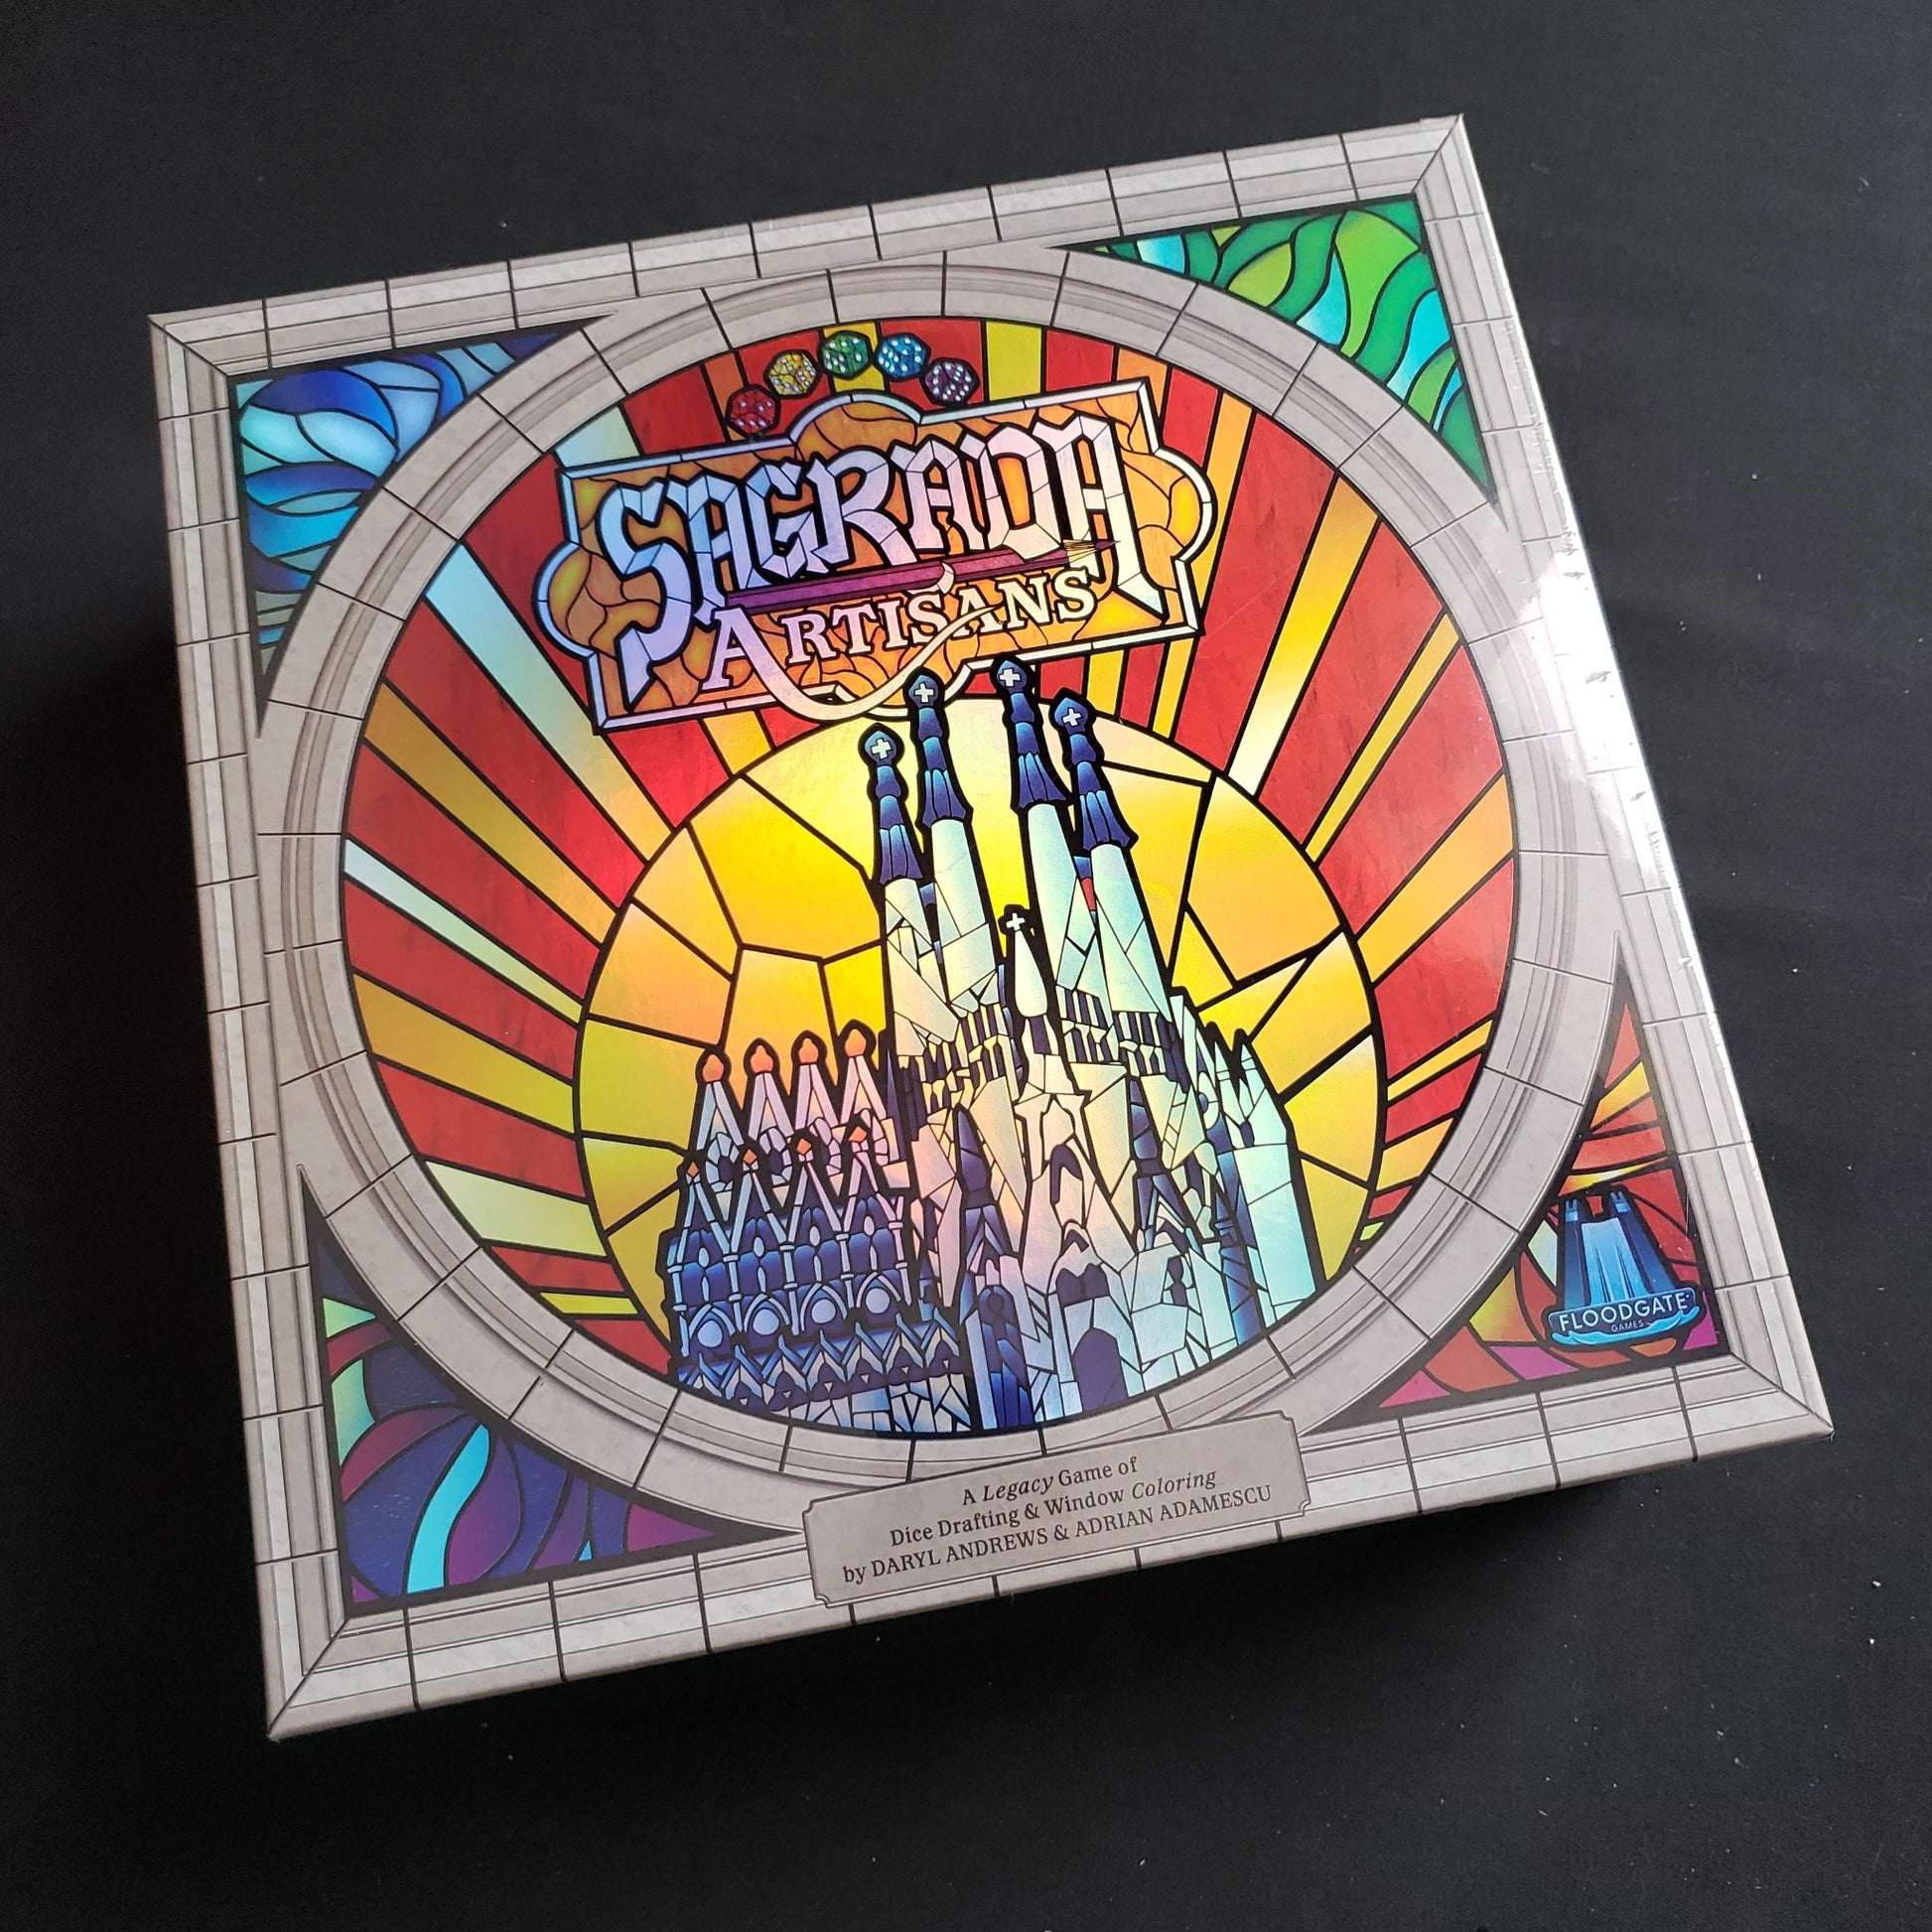 Image shows the front cover of the box of the Sagrada Artisans board game